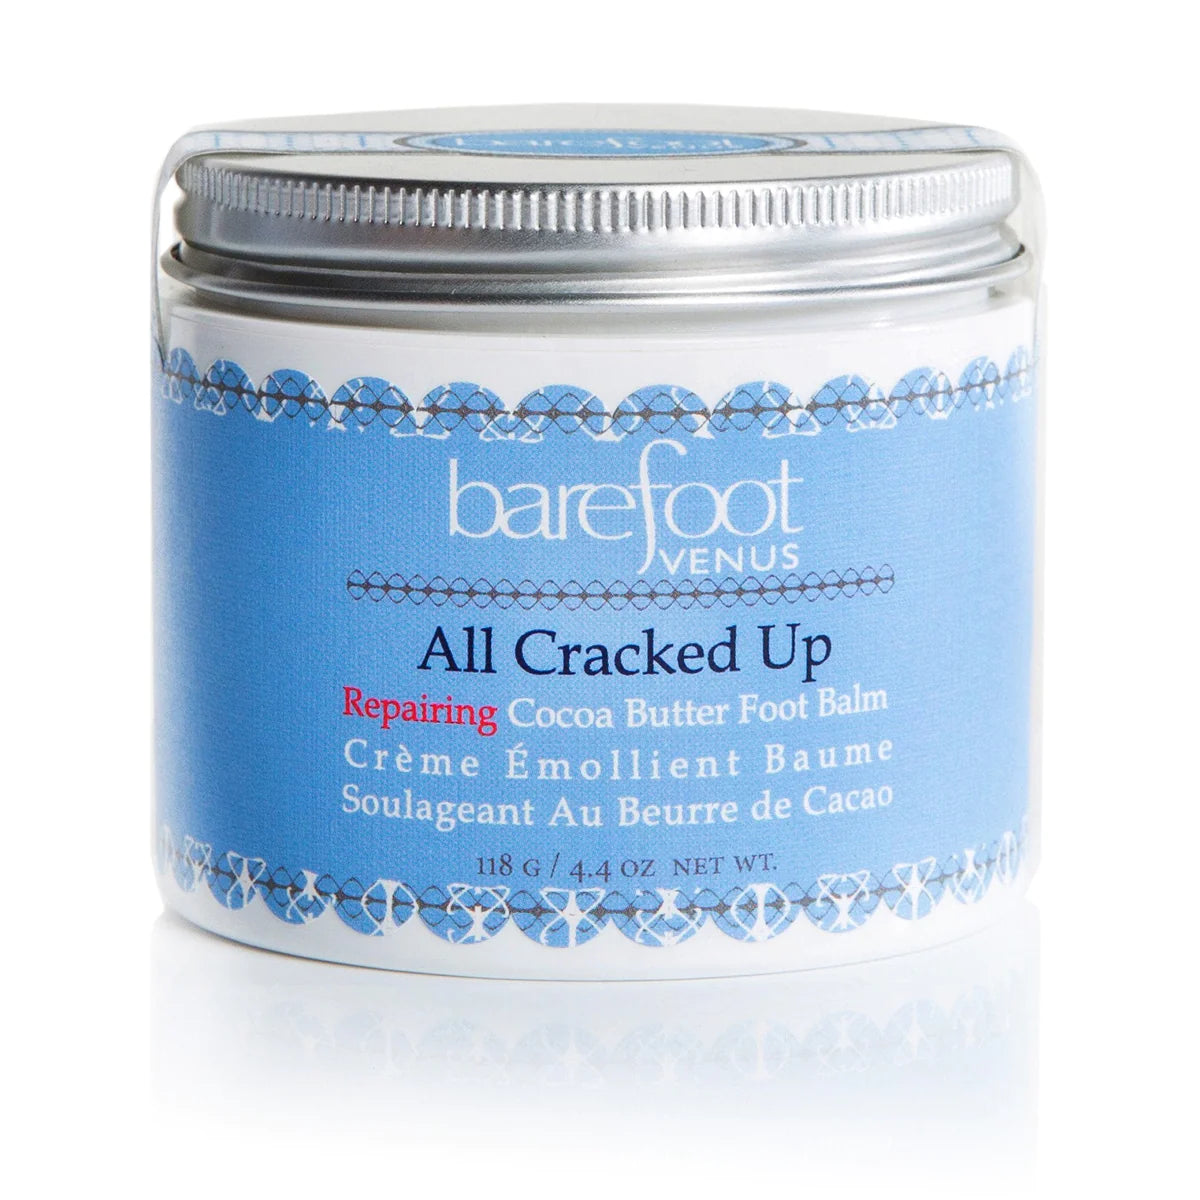 All Cracked Up Foot Balm